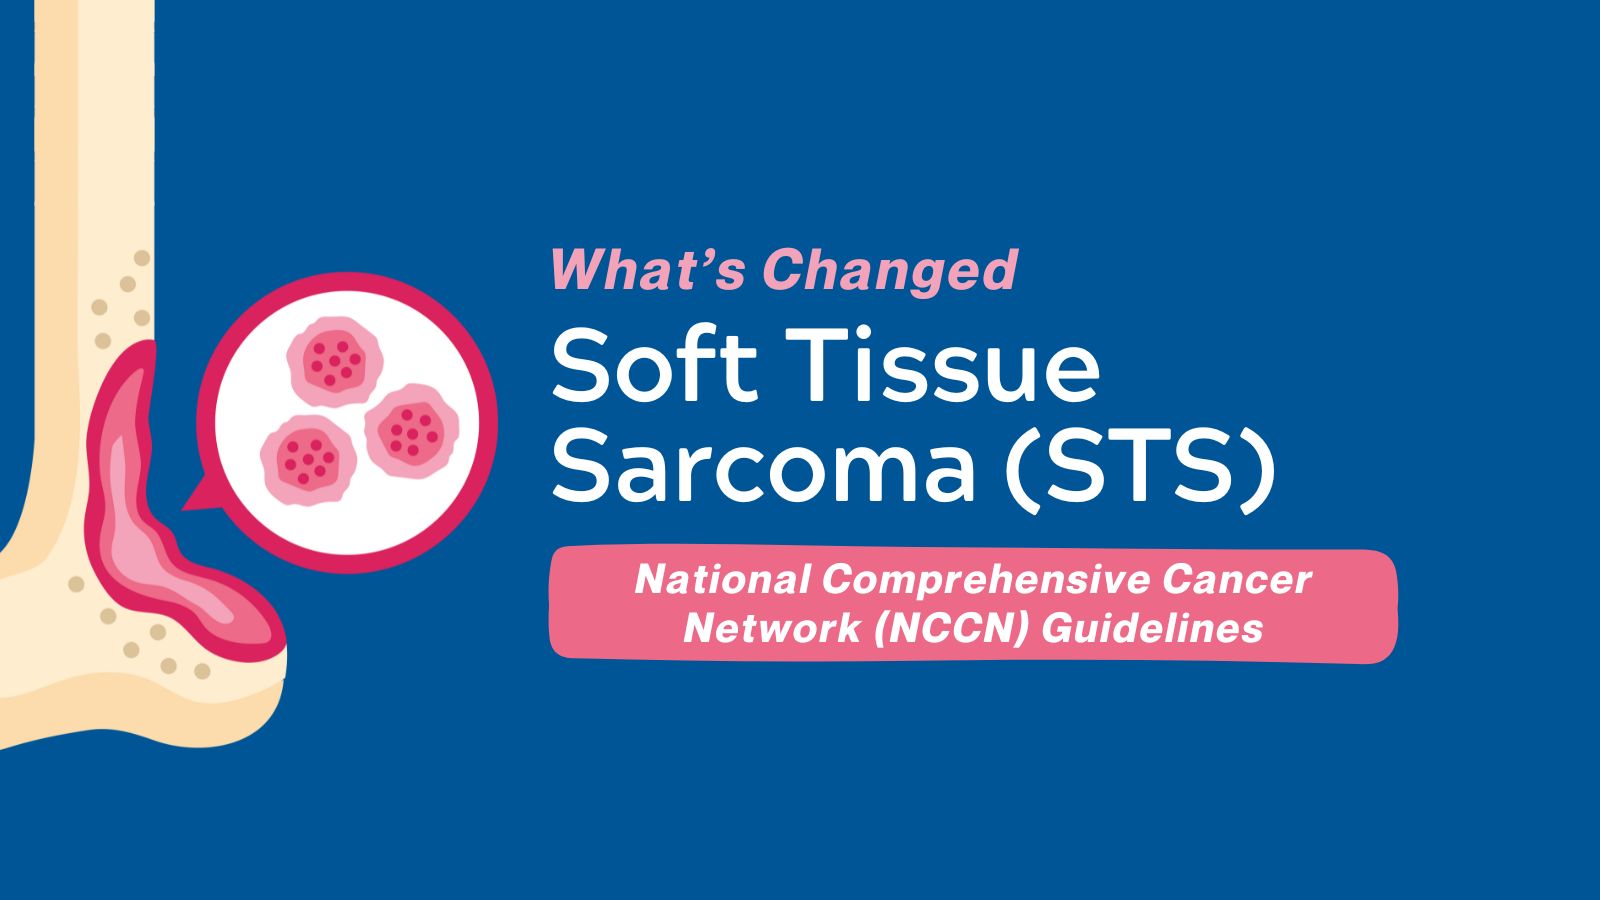 What's Changed - NCCN Soft Tissue Sarcoma (STS)